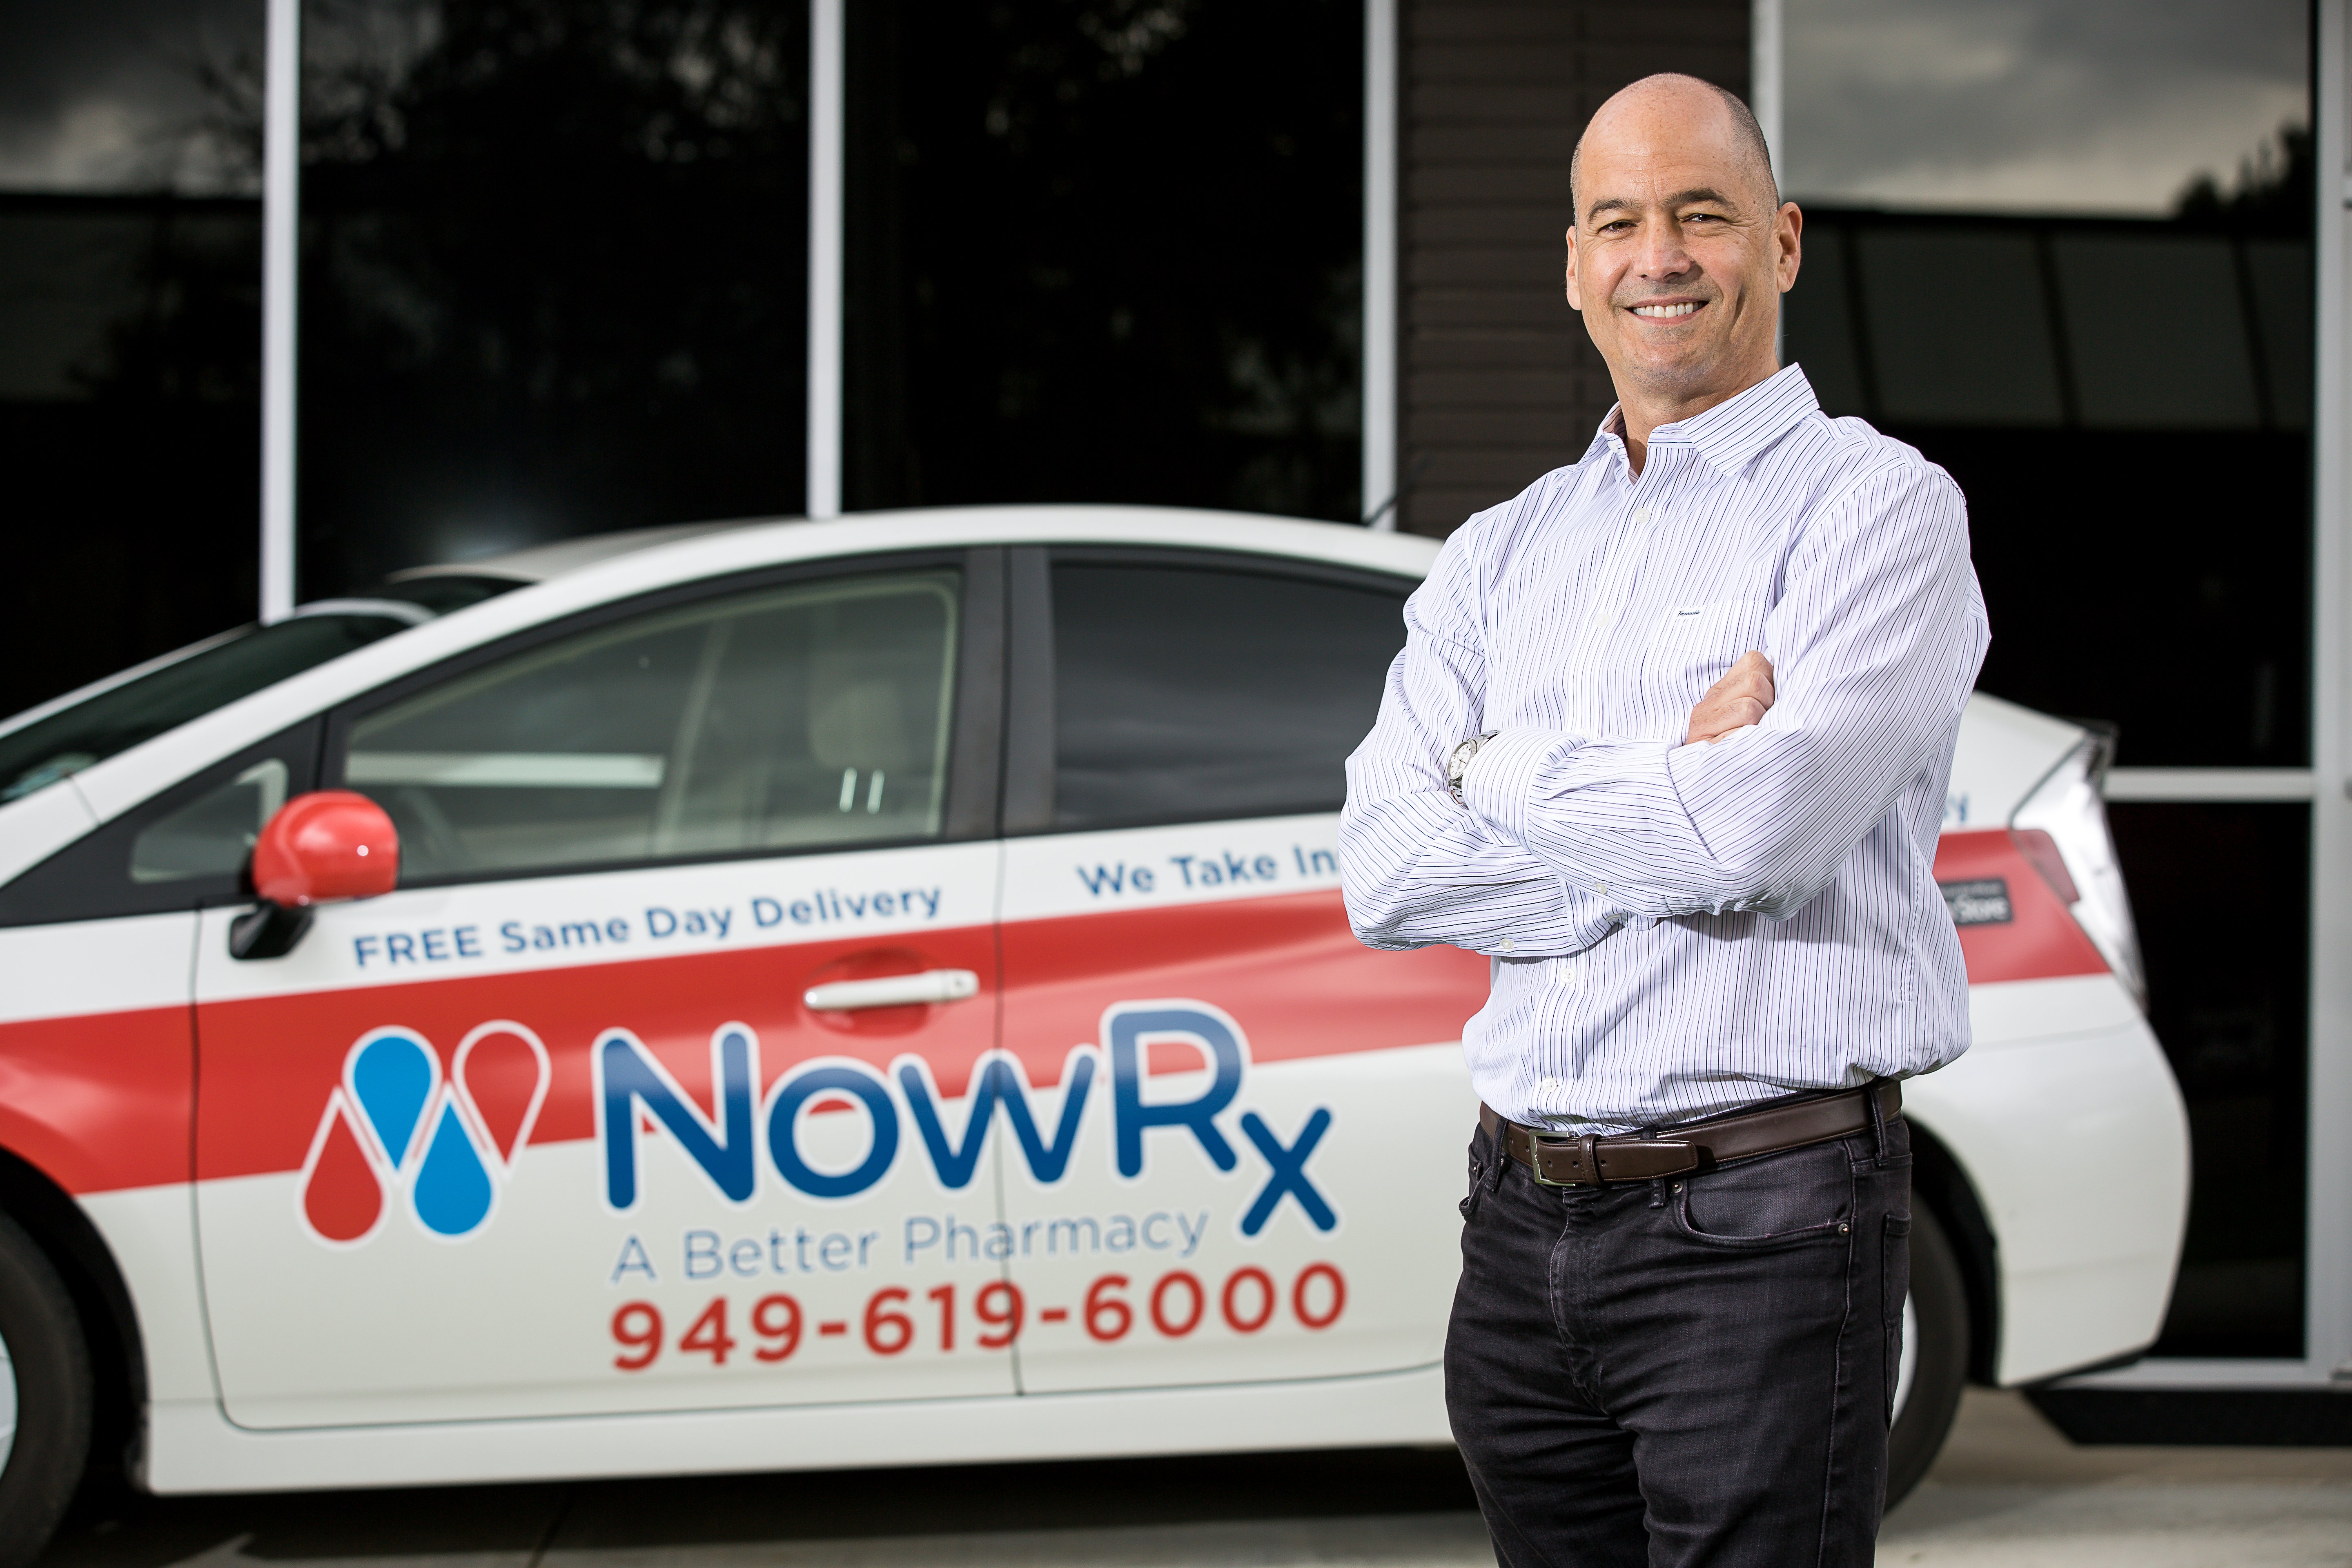 NowRx Founder and CEO Cary Breese stands in front of branded NowRx delivery car